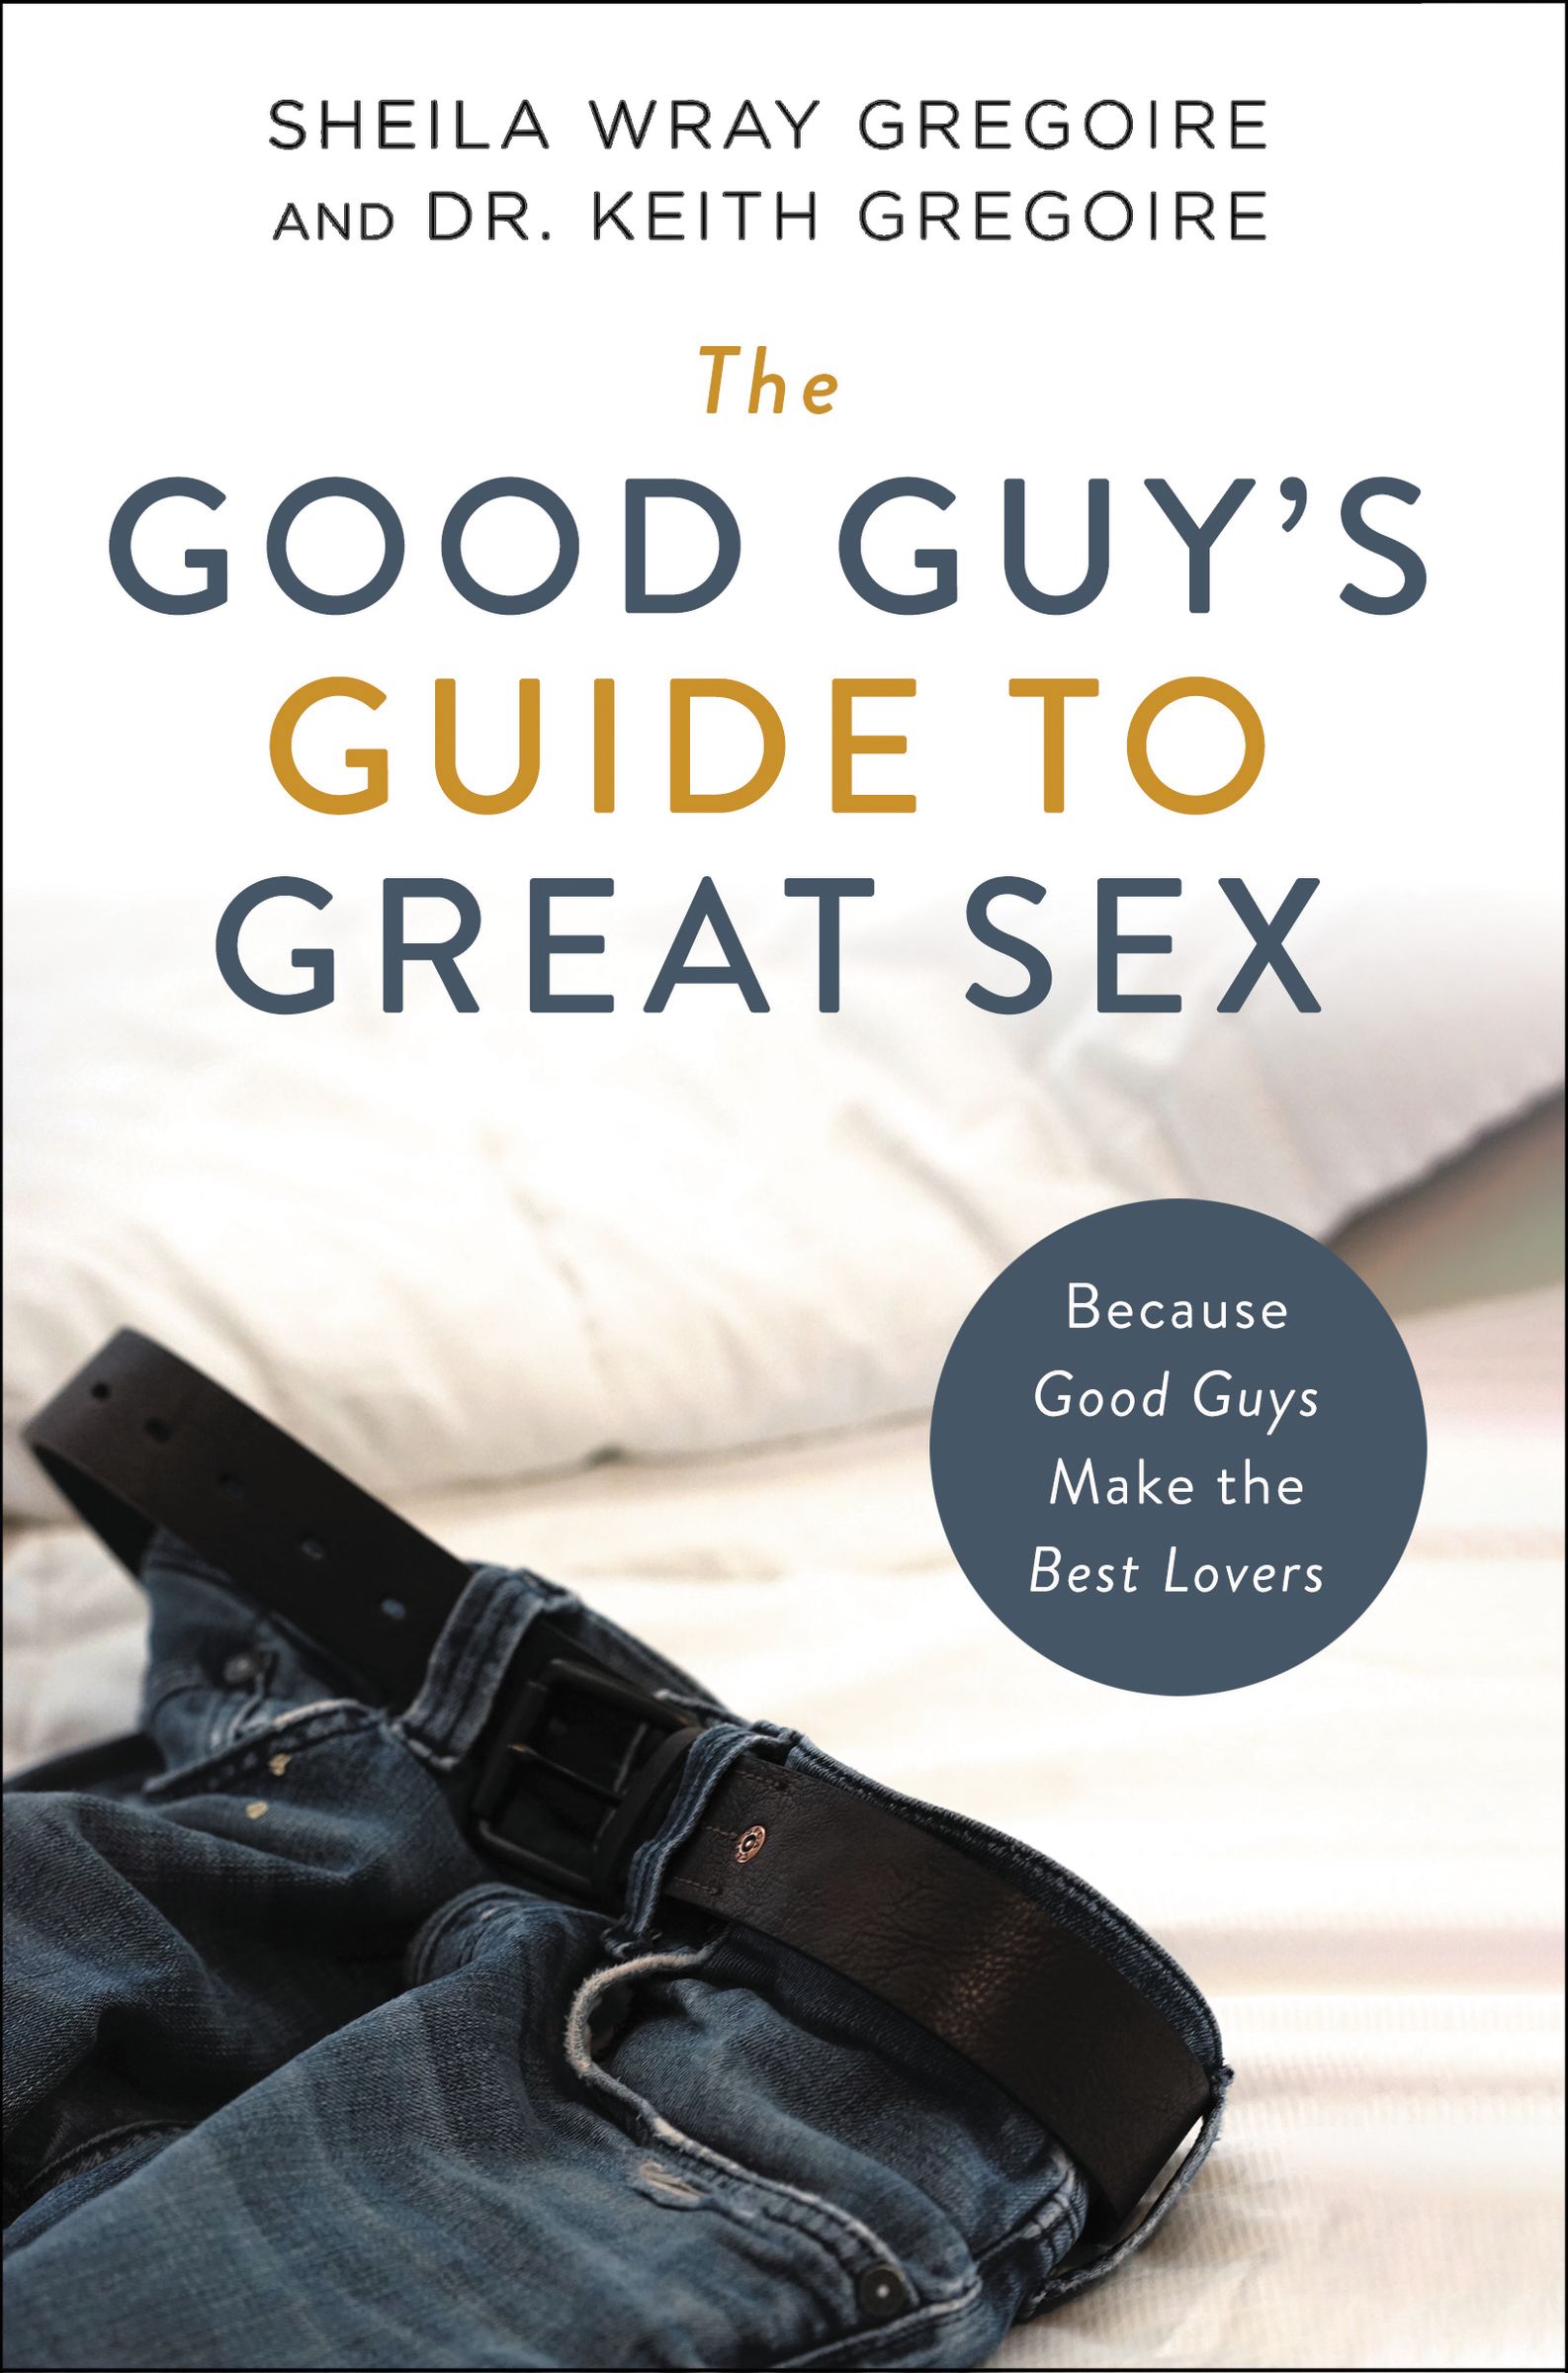 The Good Guys Guide to Great Sex by Sheila Wray Gregoire Sex Image Hq